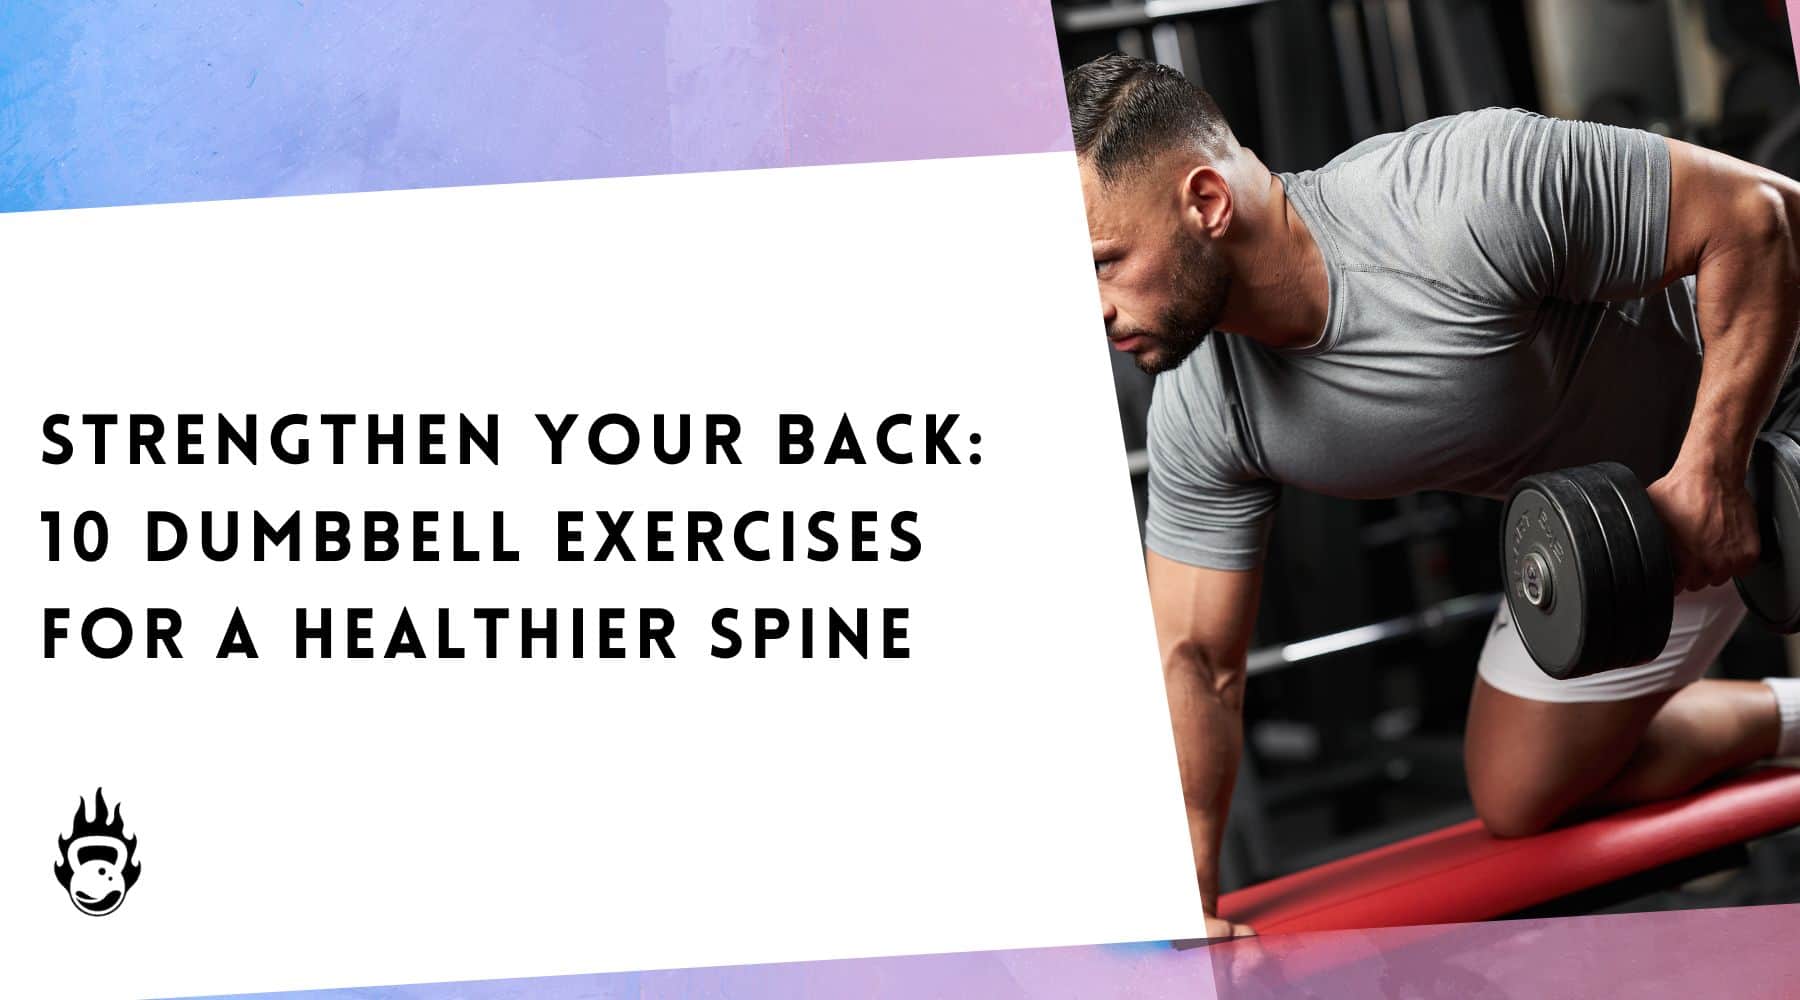 Strengthen Your Back: 10 Dumbbell Exercises for a Healthier Spine –